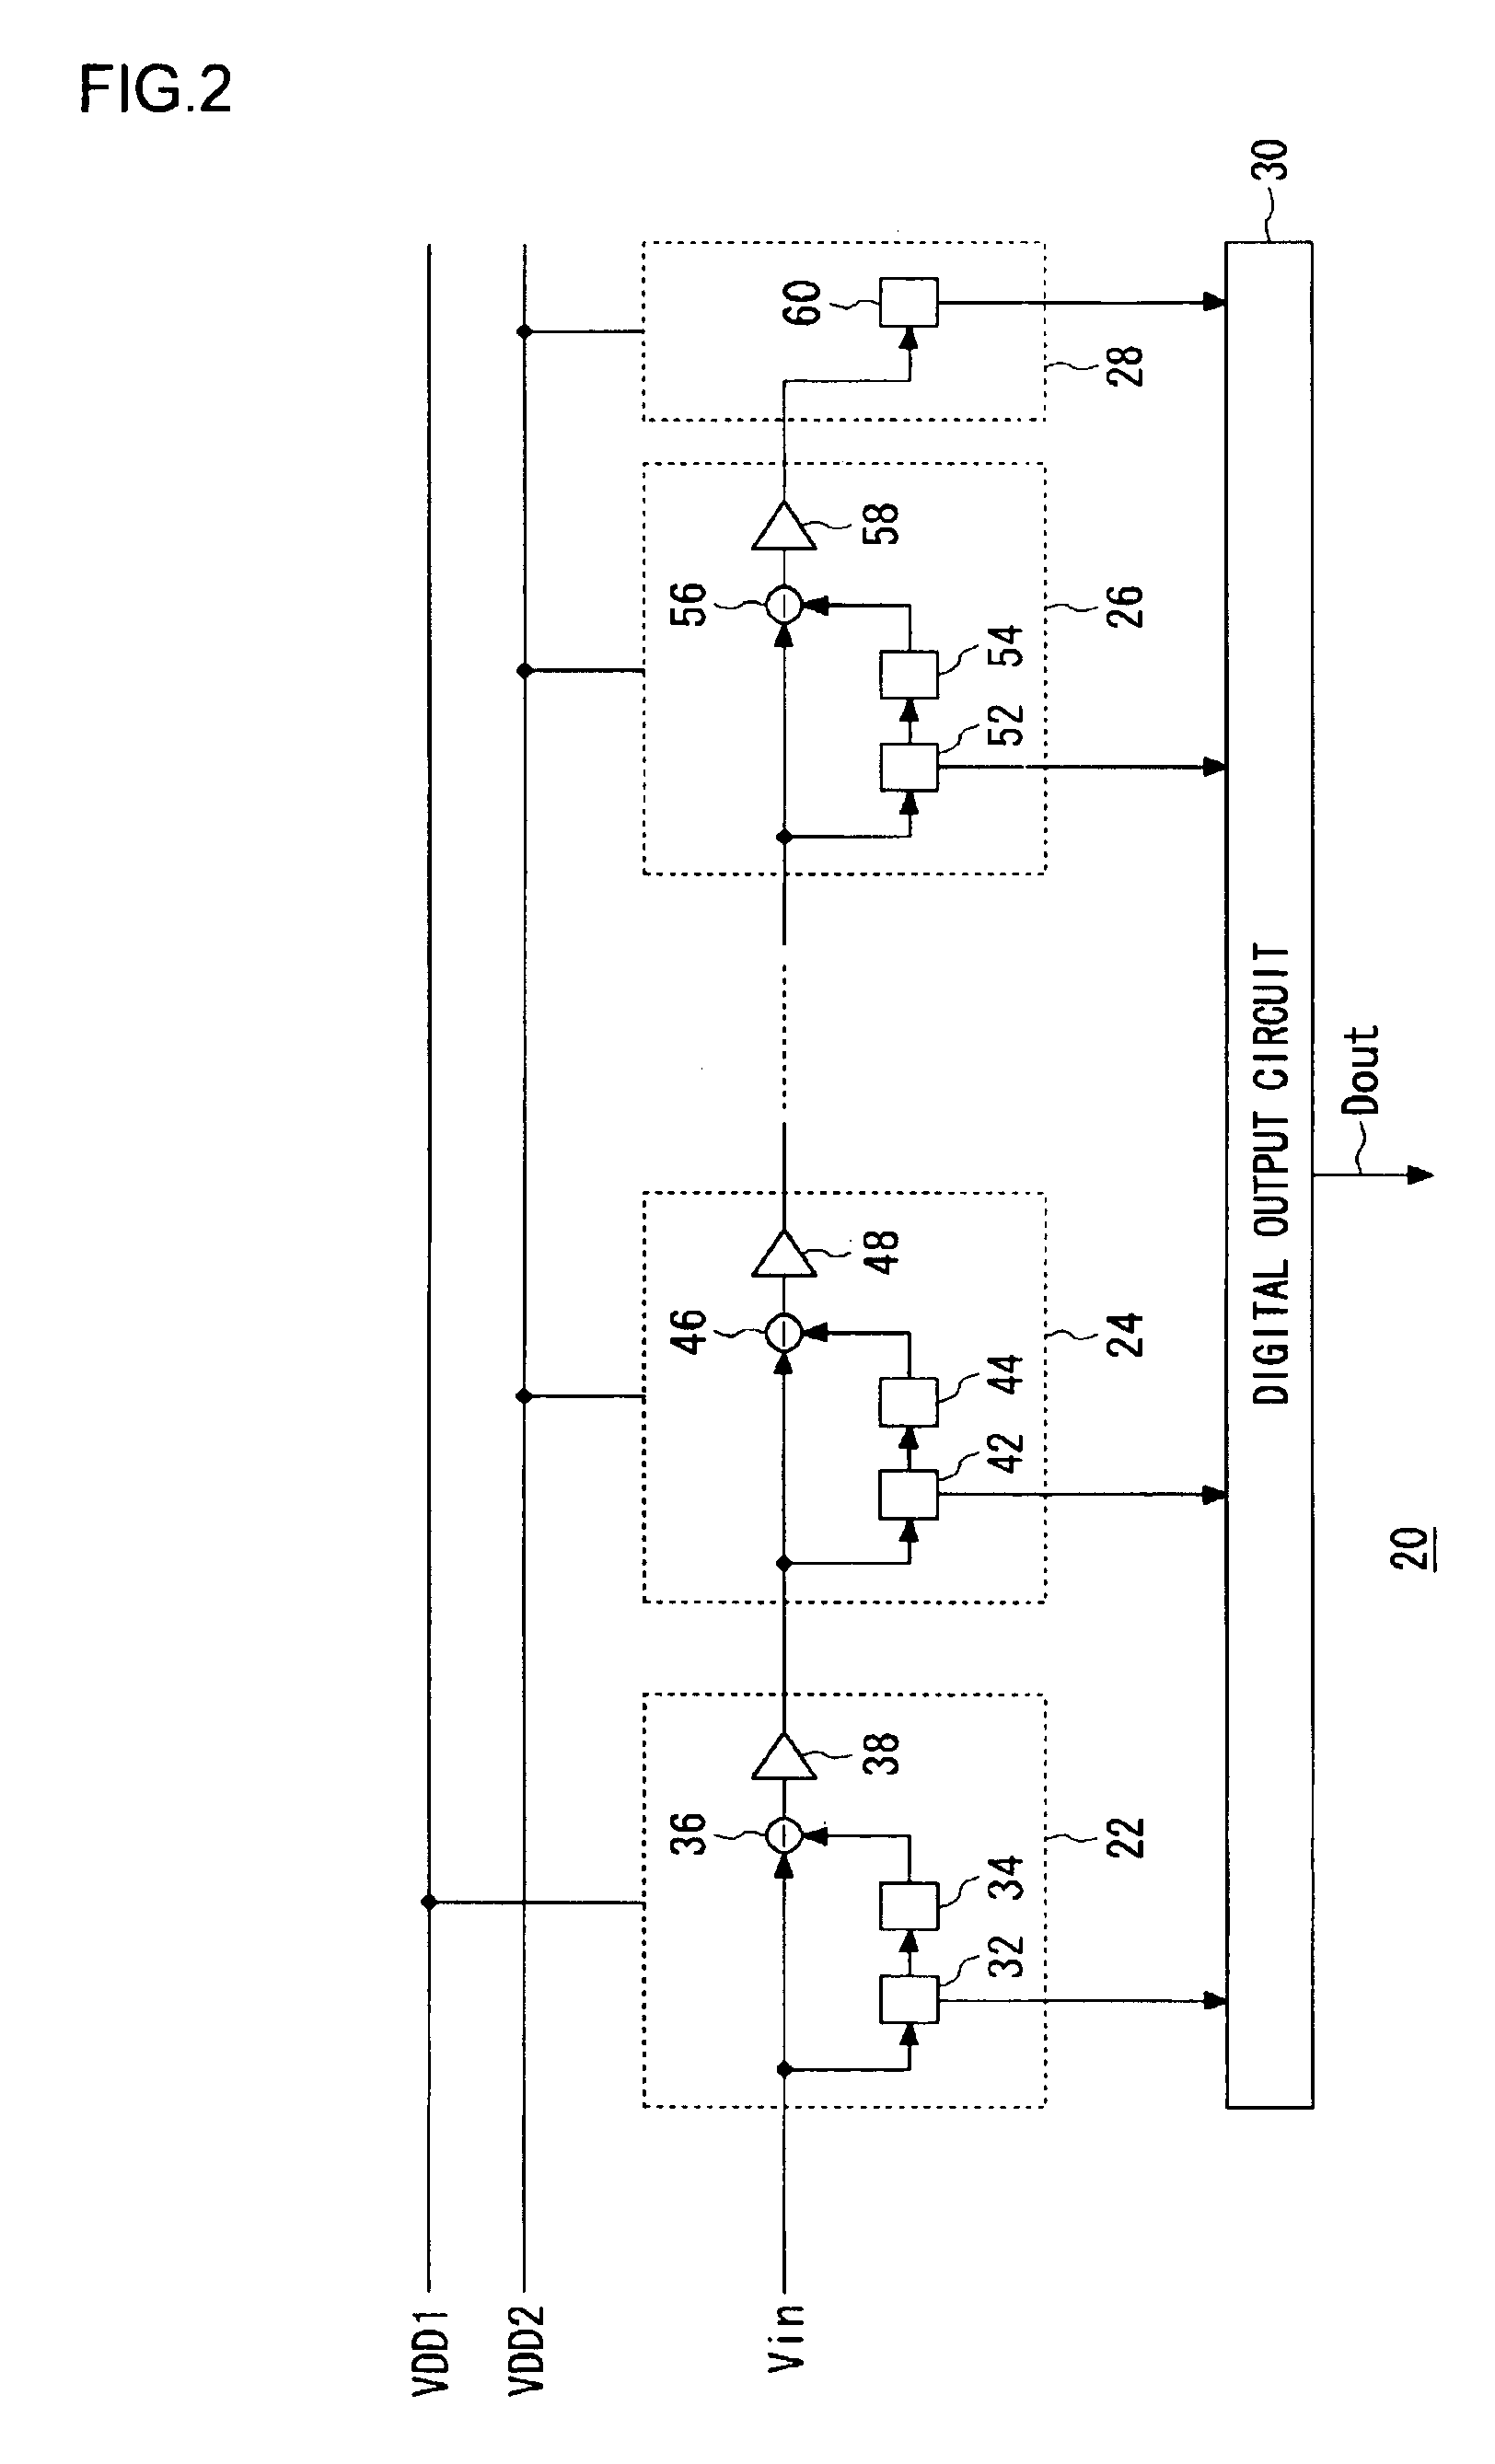 Analog-to-digital conversion circuit and image processing circuit for stepwise conversion of a signal through multiple stages of conversion units